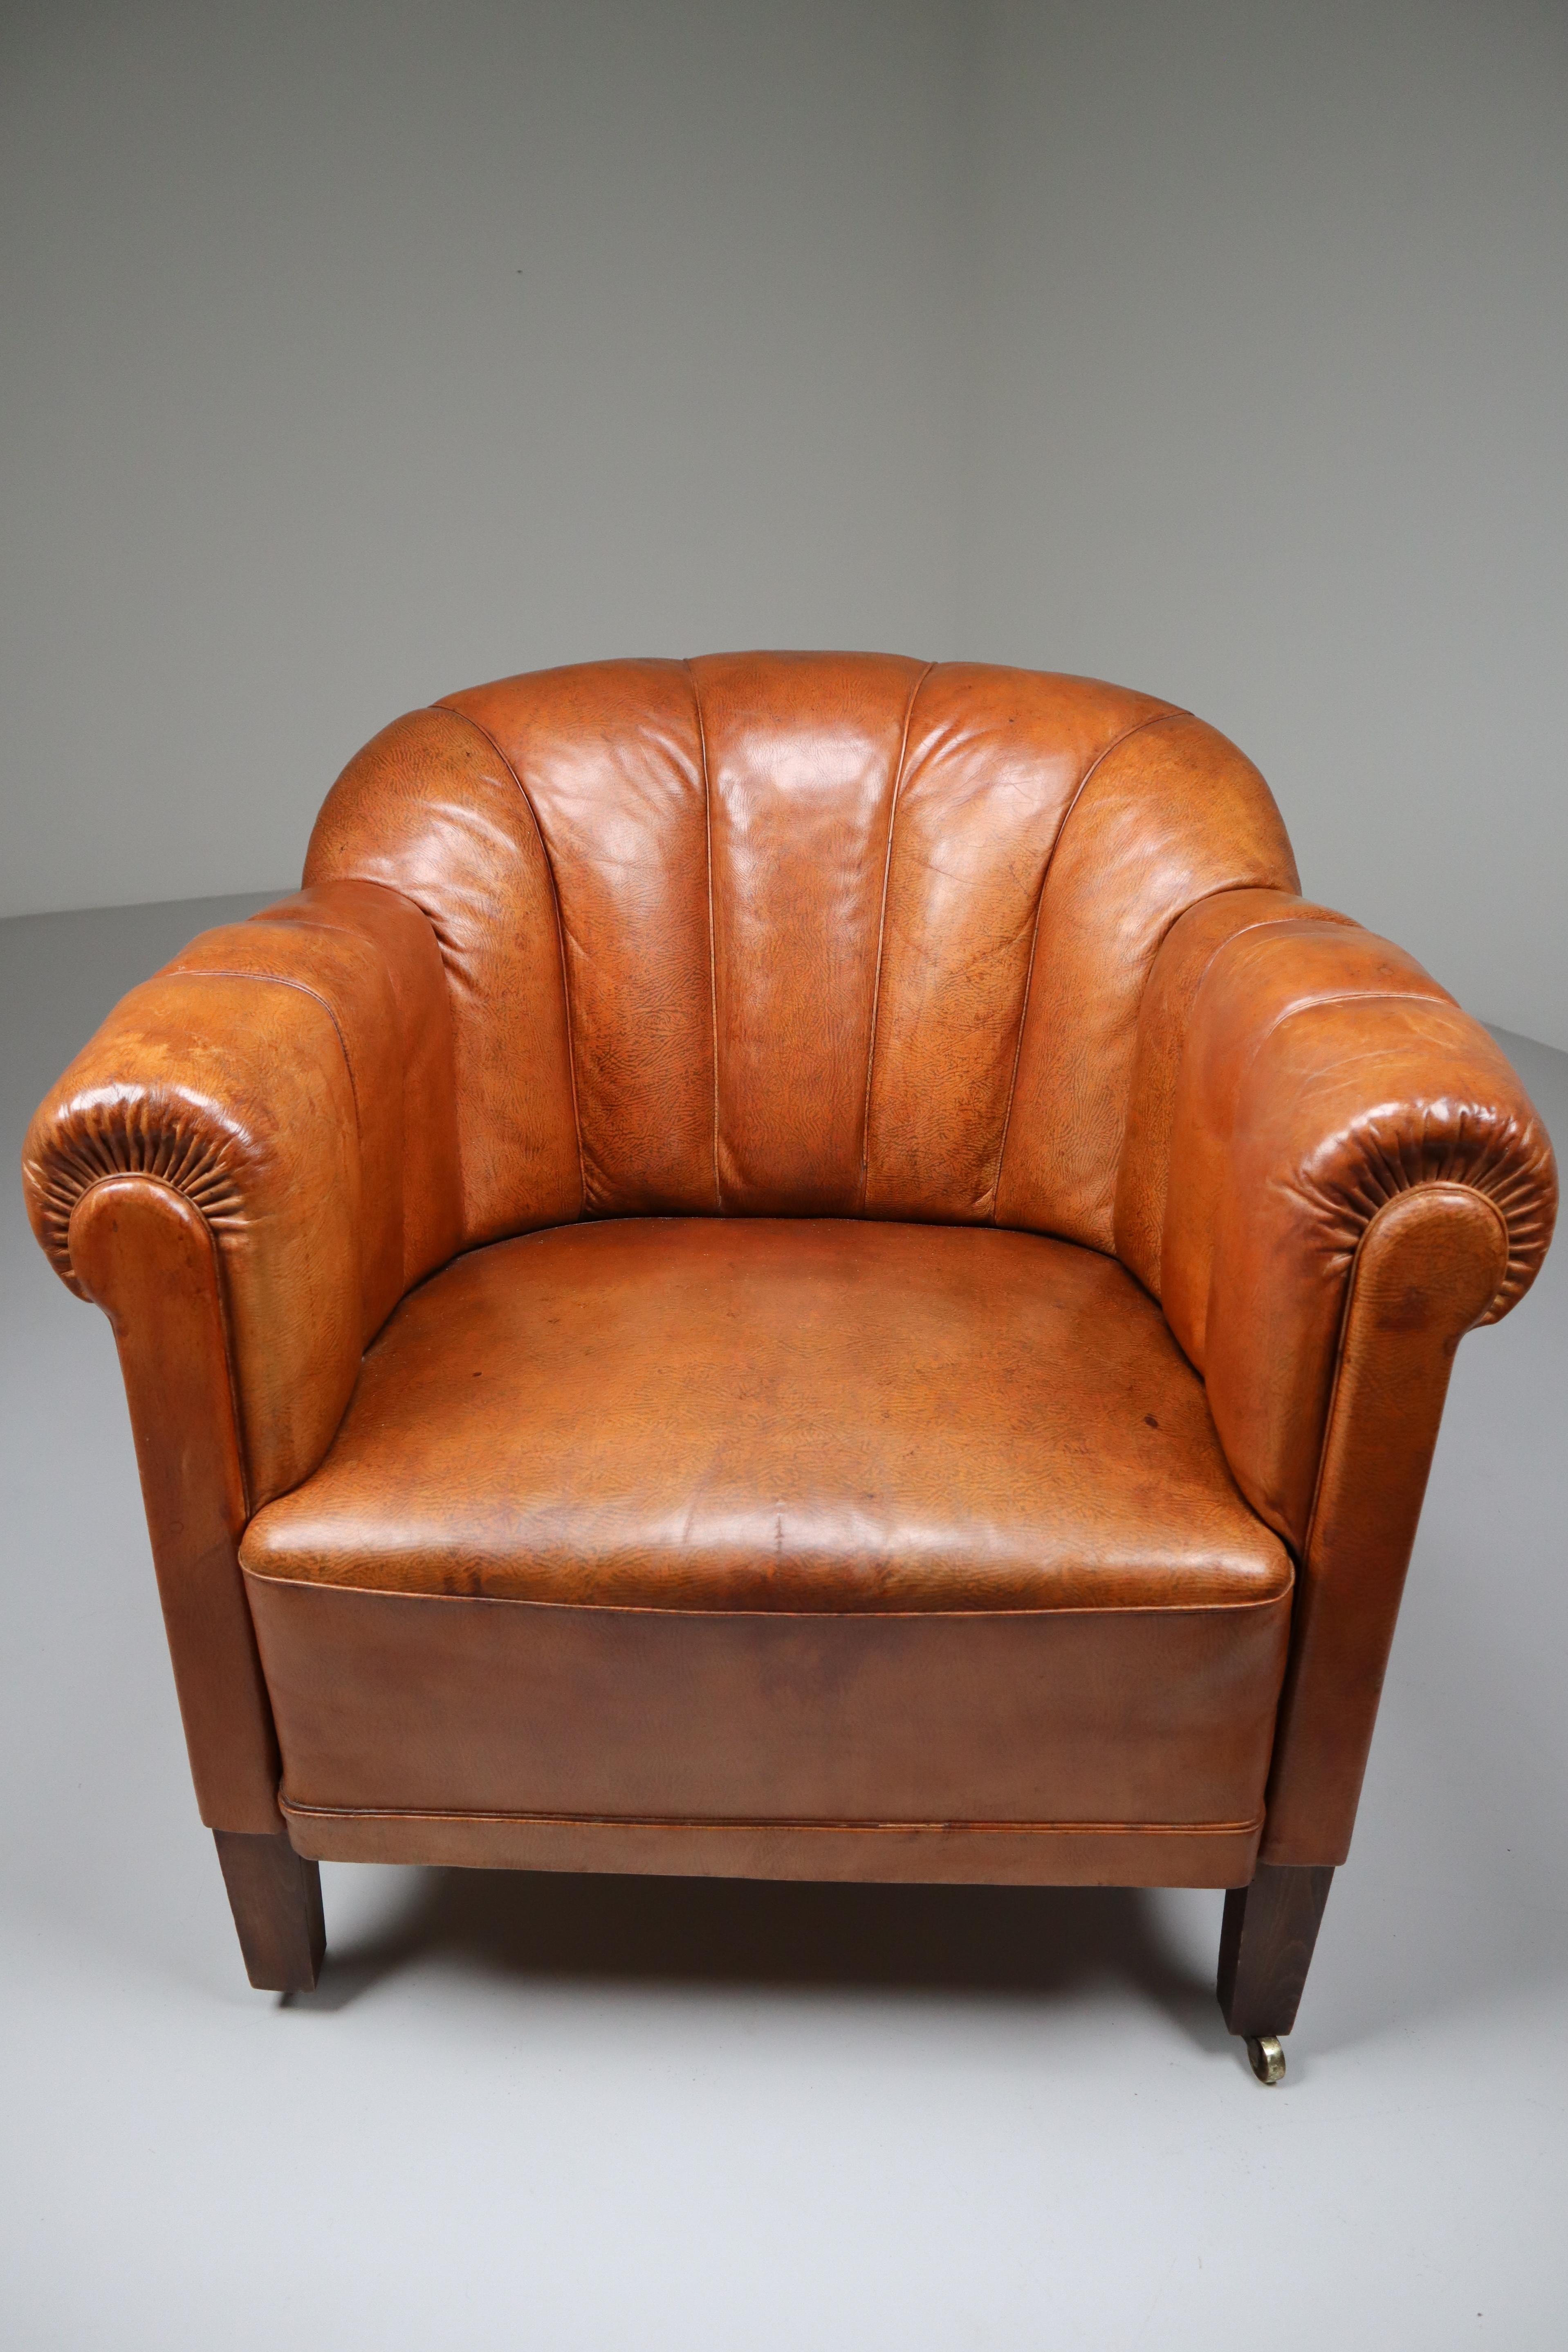 20th Century Art Deco Club Chair in Patinated Cognac Leather, Praque, 1930s